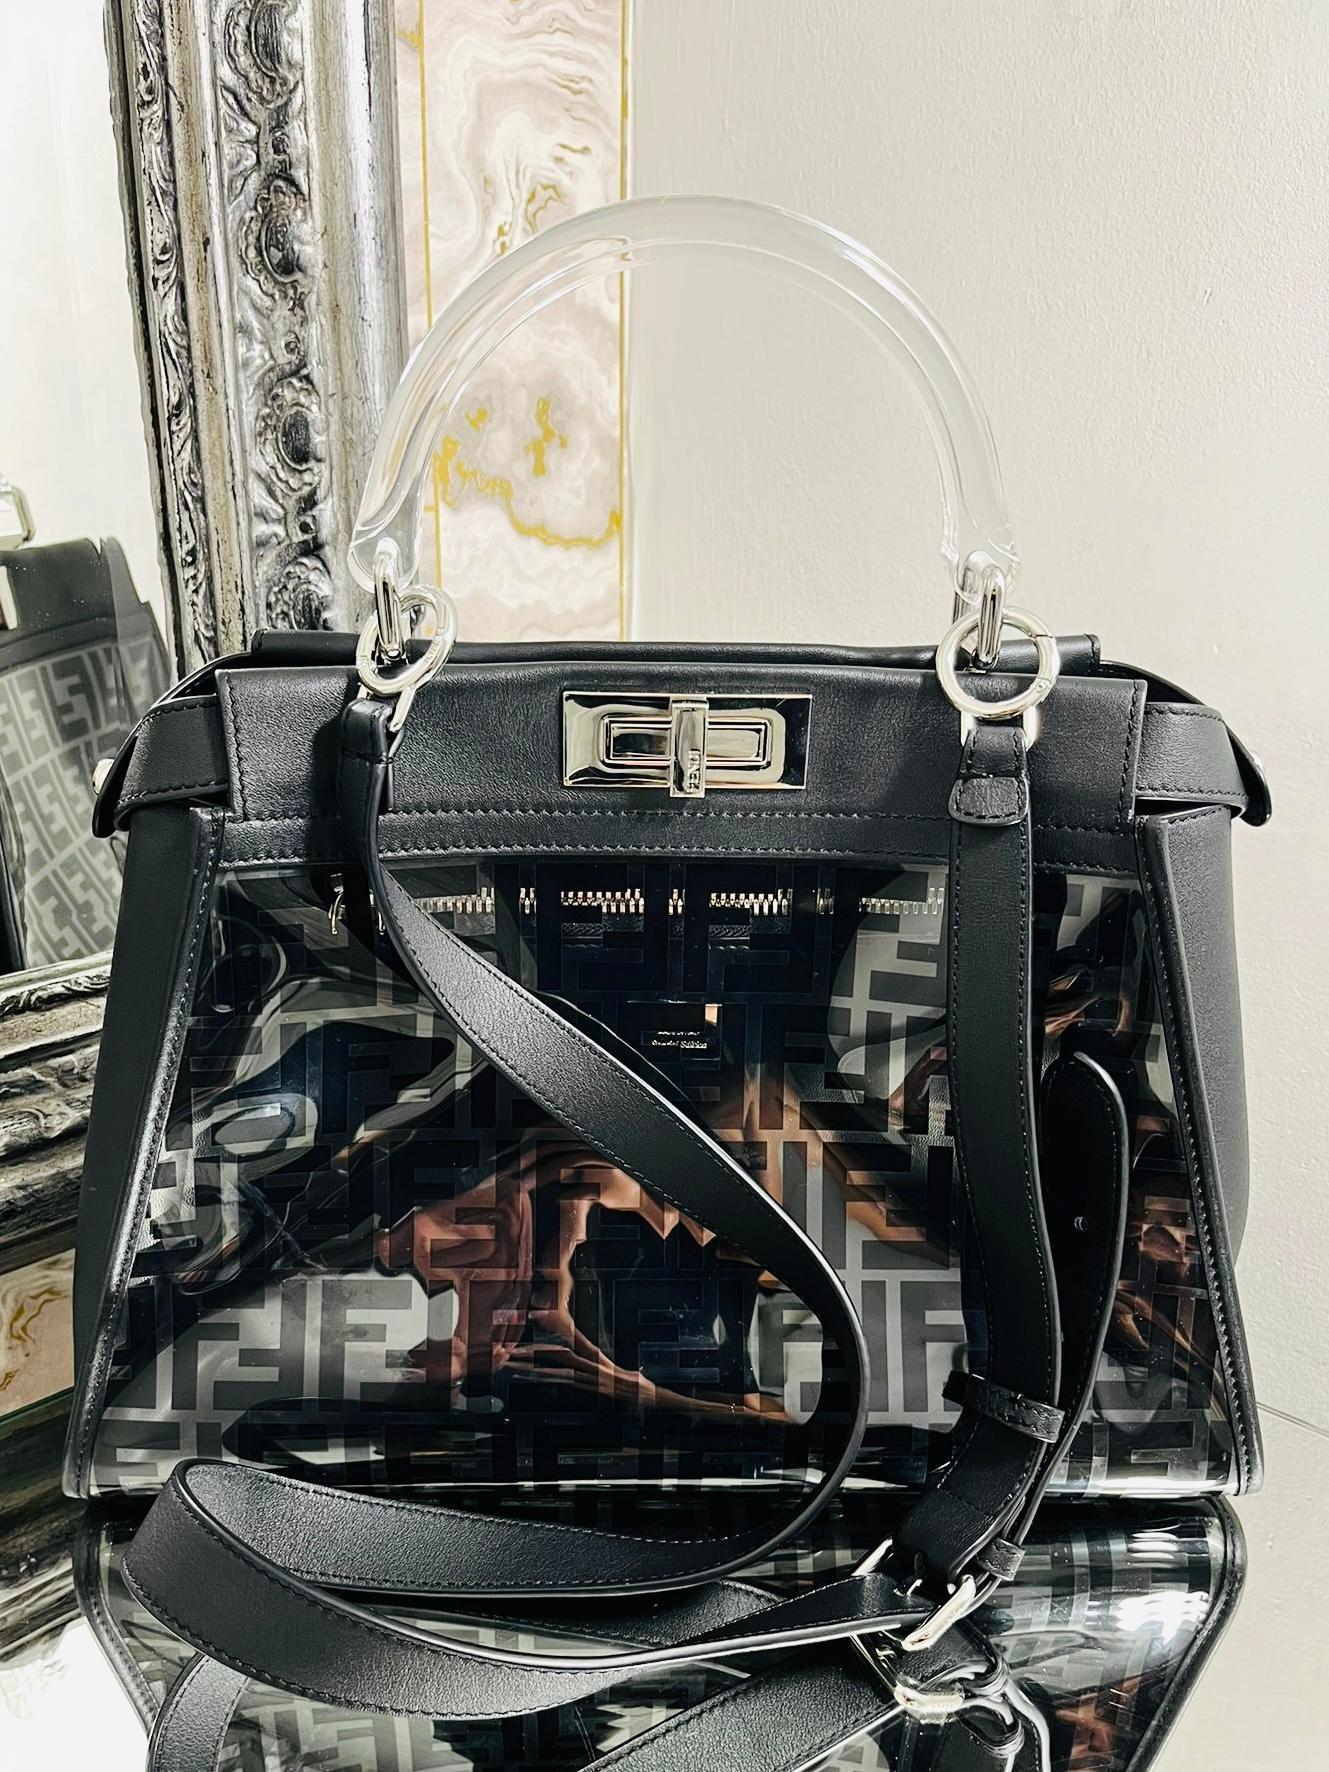 Fendi 'FF' Zucca Logo PVC Peekaboo Bag

Transparent PVC outer with large black 'FF' logo through out.

Acrylic transparent top carry handle, silver hardware, black leather accents

and a removable shoulder/crossbody strap. Fendi logo twist lock